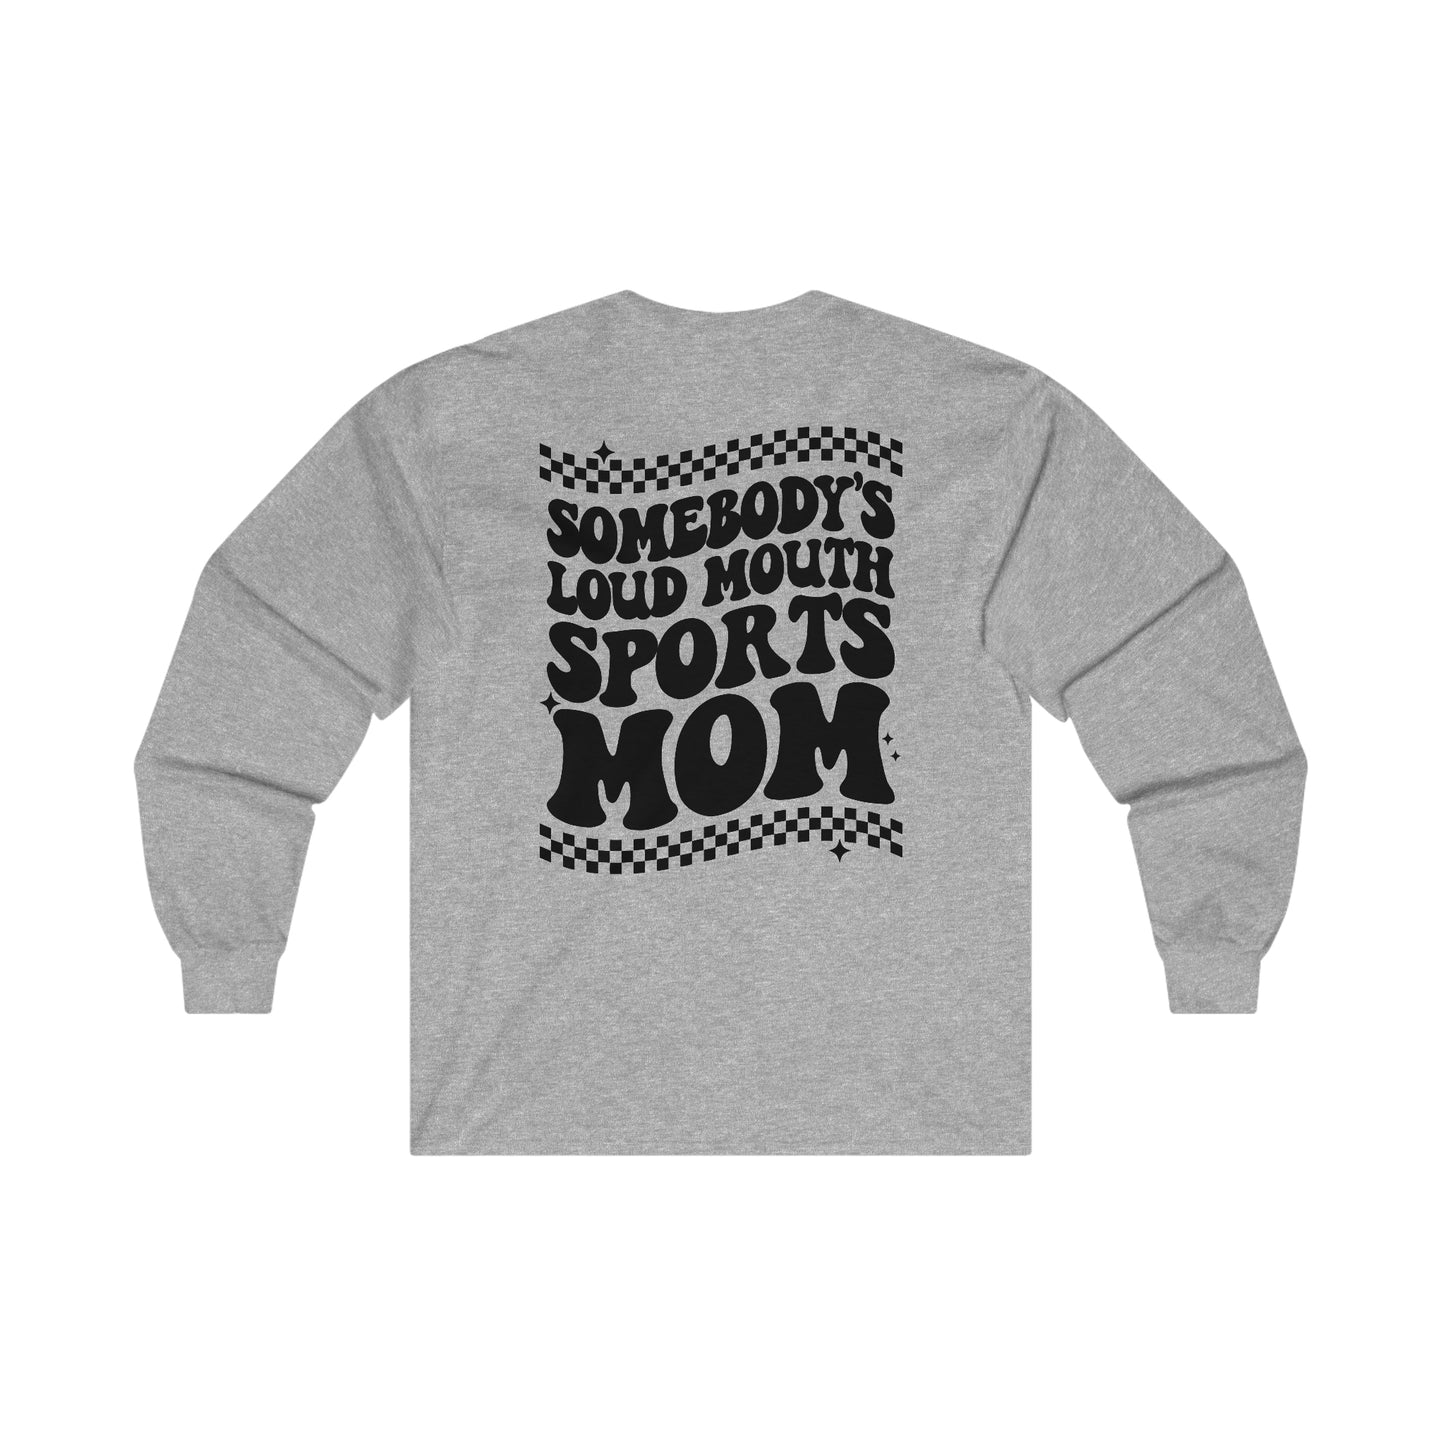 Loud Mouth Sports Mom - Unisex Ultra Cotton Long Sleeve Tee